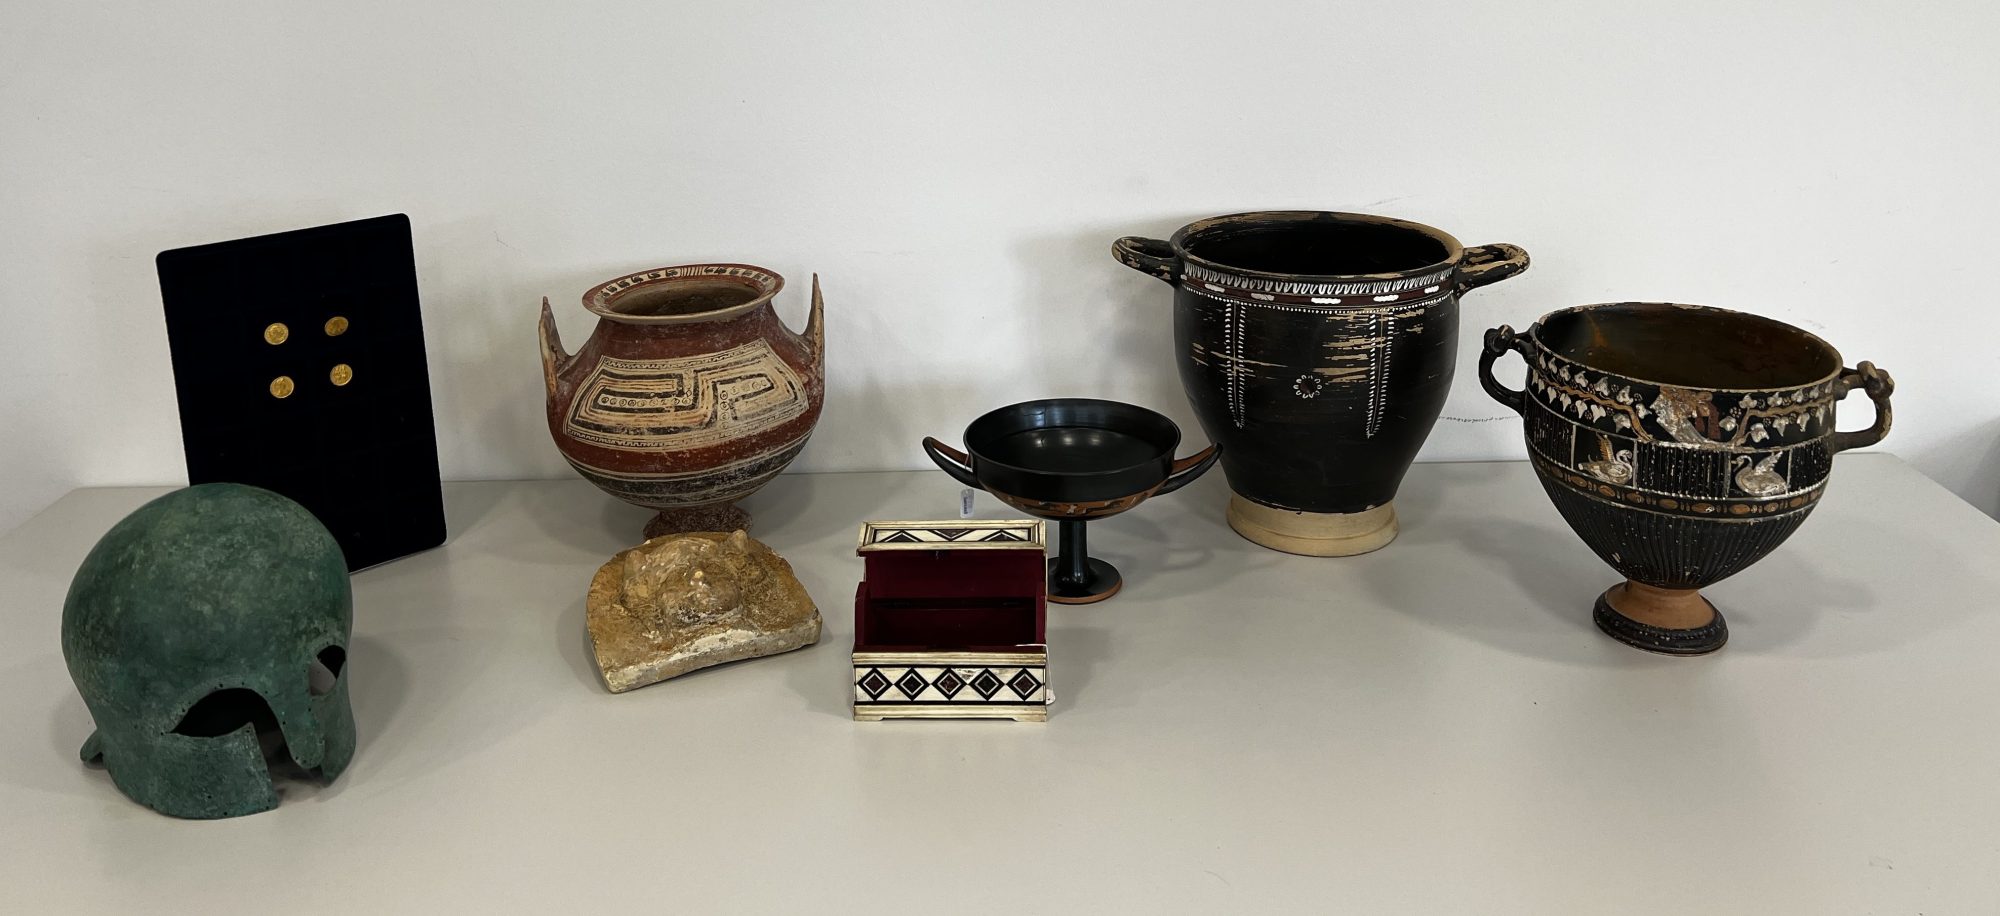 Several of the artifacts that Germany returned to Italy on June 5, 2023 after they had been stolen from Italian museums or taken from illegal excavations. They include a bronze helmet, a kylix bowl, and ancient gold coins.